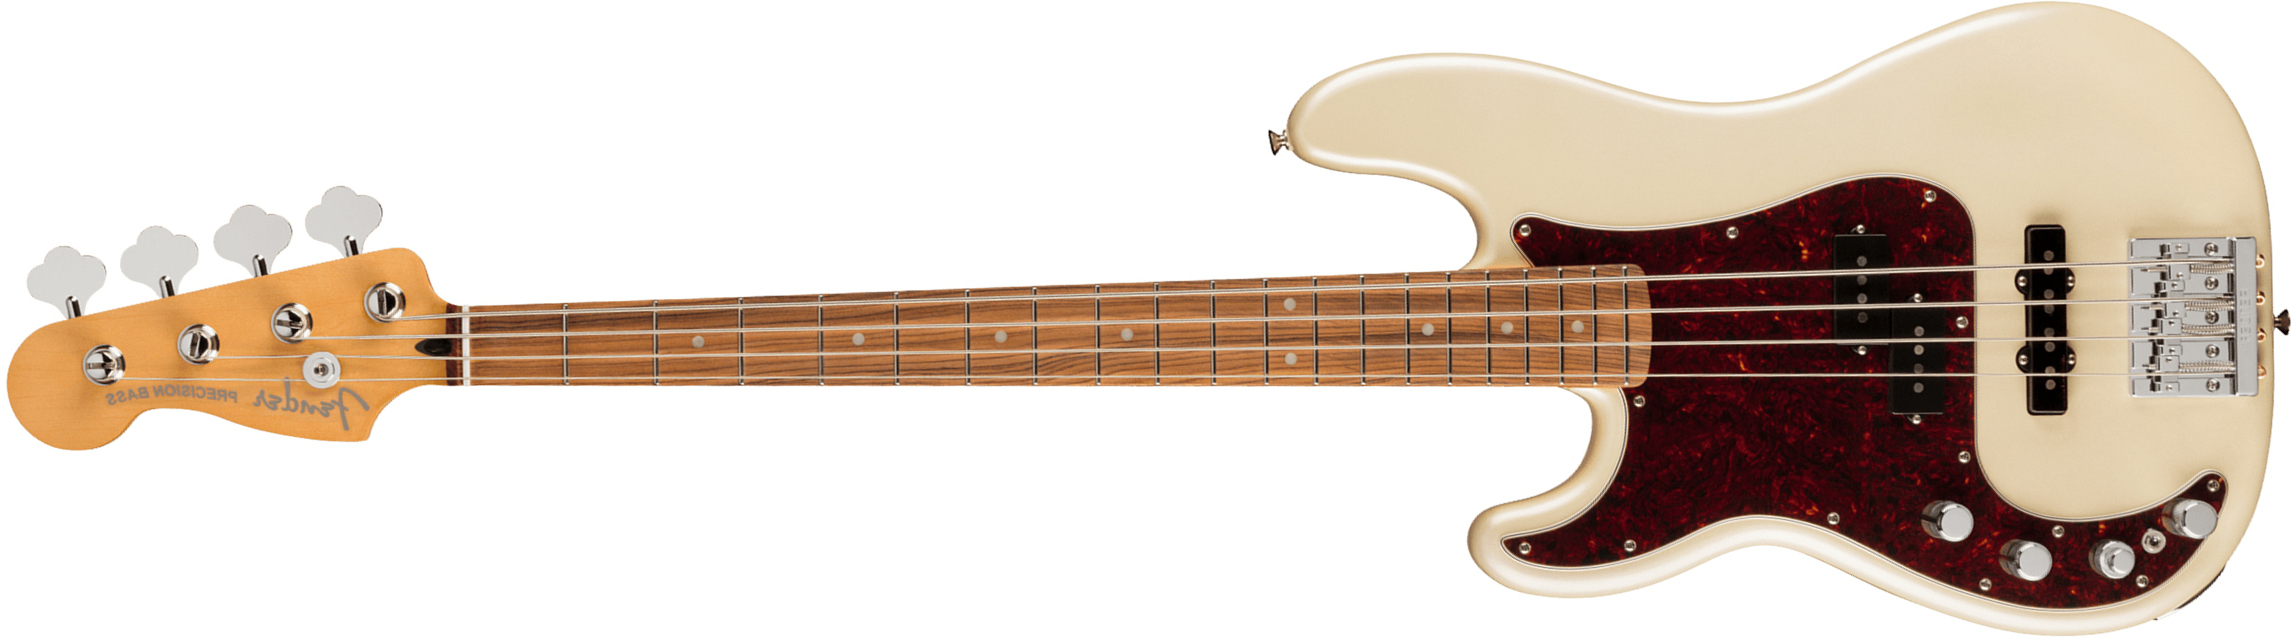 Fender Precision Bass Player Plus Gaucher Mex Active Pf - Olympic Pearl - Solidbody E-bass - Main picture